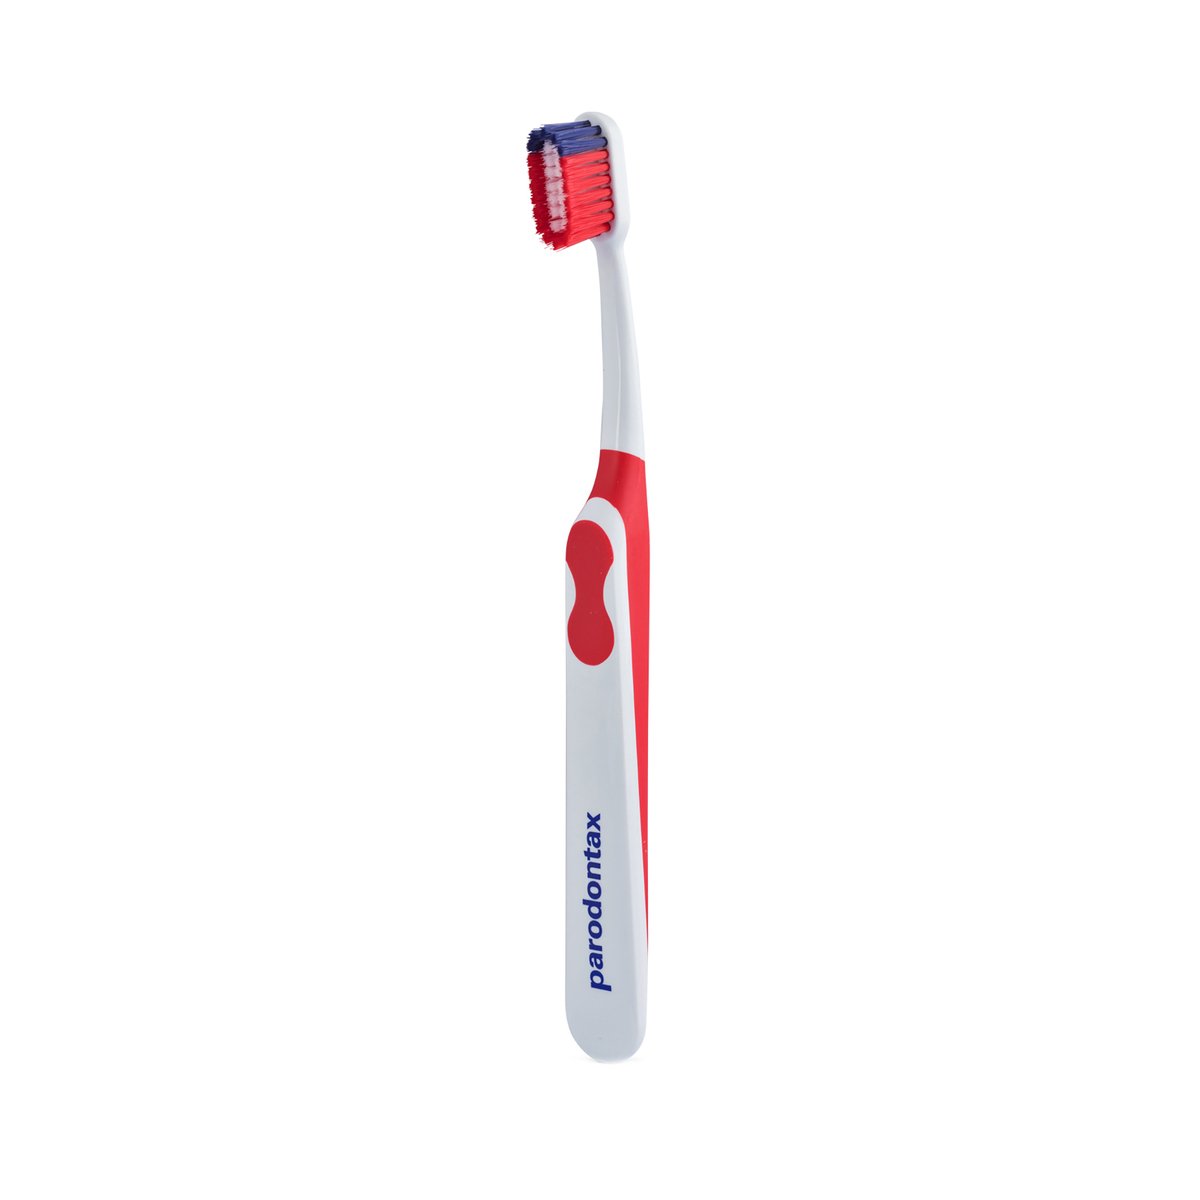 Parodontax Toothbrush Soft Assorted Color, 1 pc